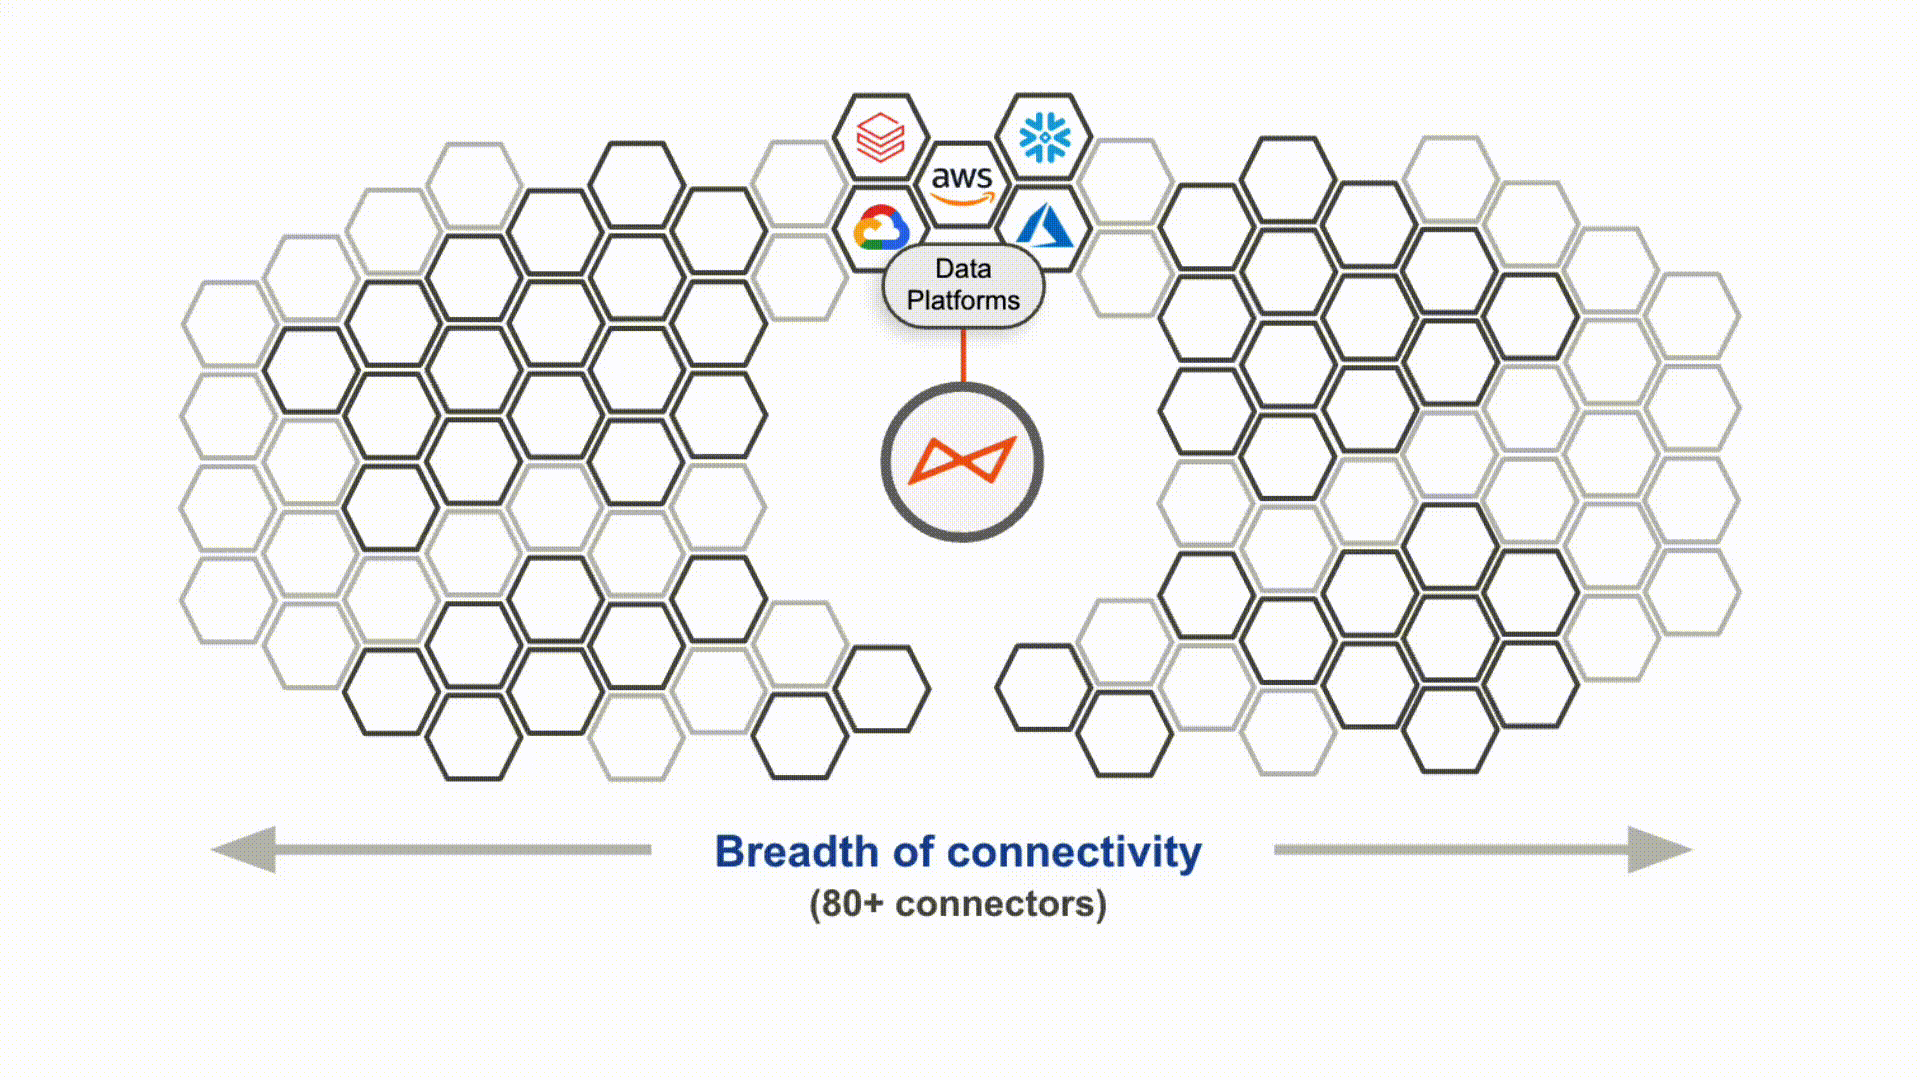 Modern data stack of cloud complexity crisis showcasing the Open Connectors and the Breadth of connectivity